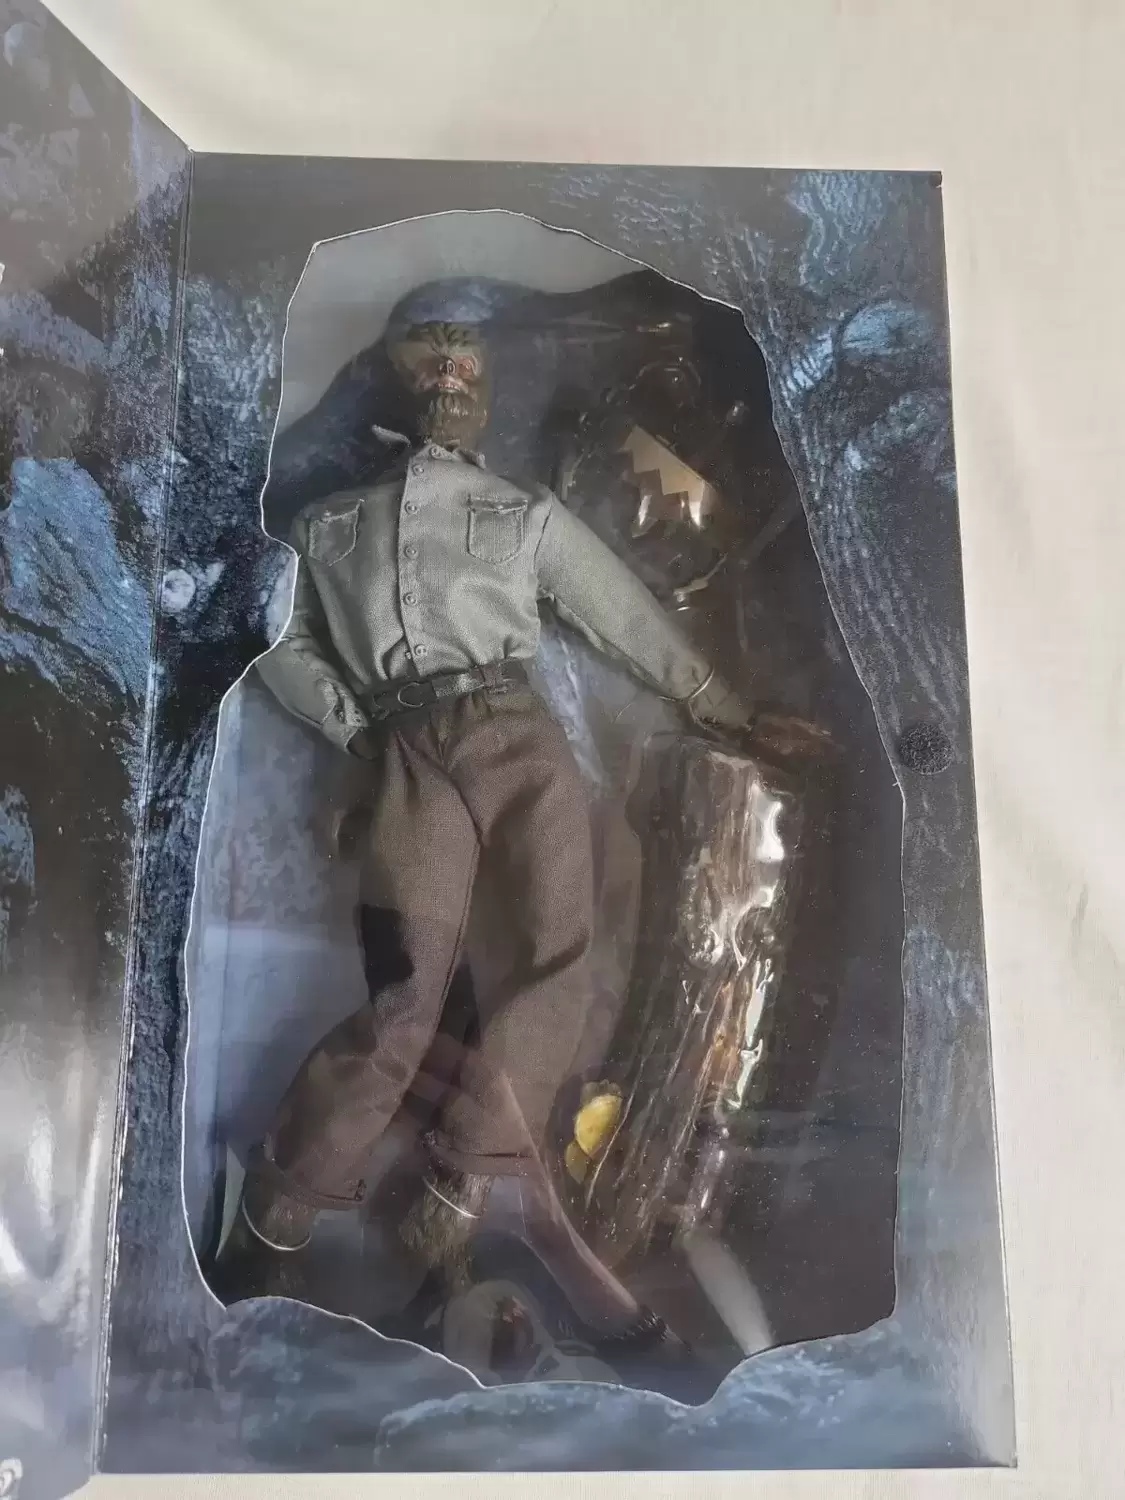 Sideshow - Universal Monsters - The Wolf Man 1941 12”